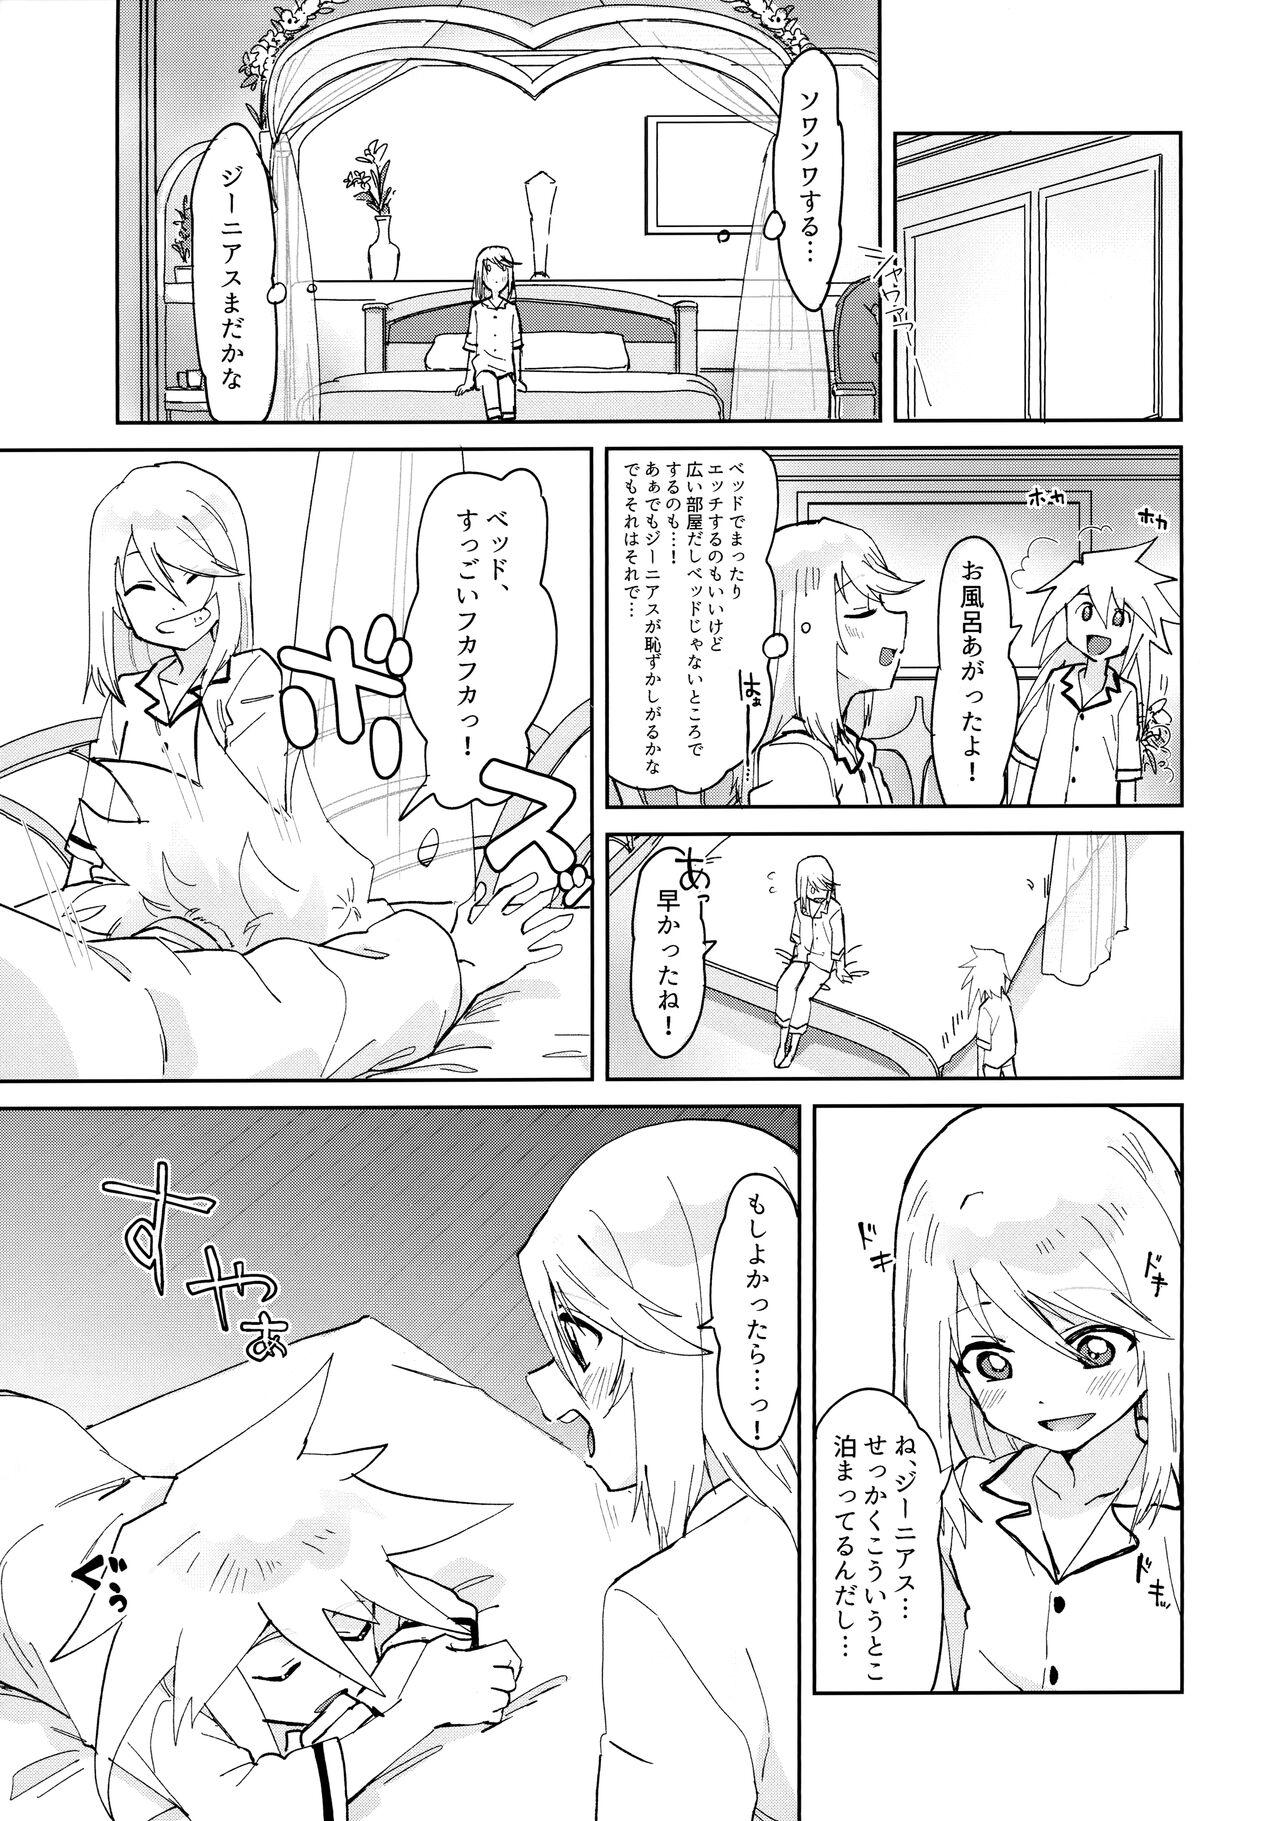 Viet Tropical in Altamira - Tales of symphonia German - Page 6